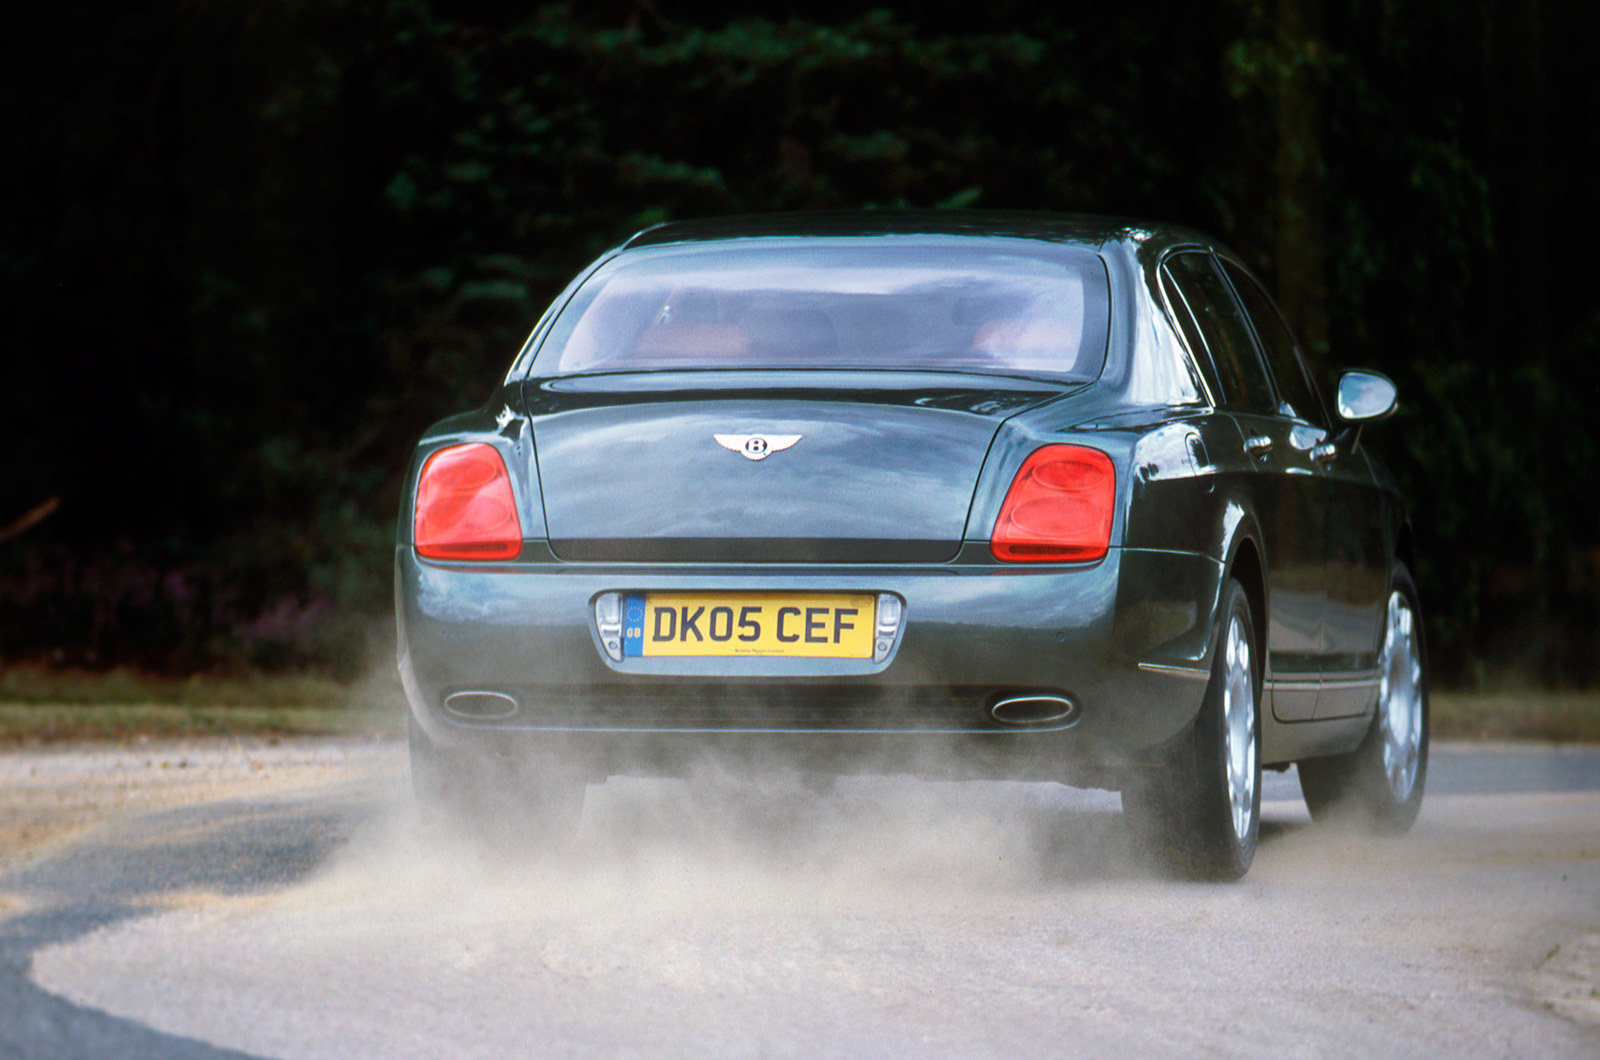 Bentley Continental Flying Spur rear